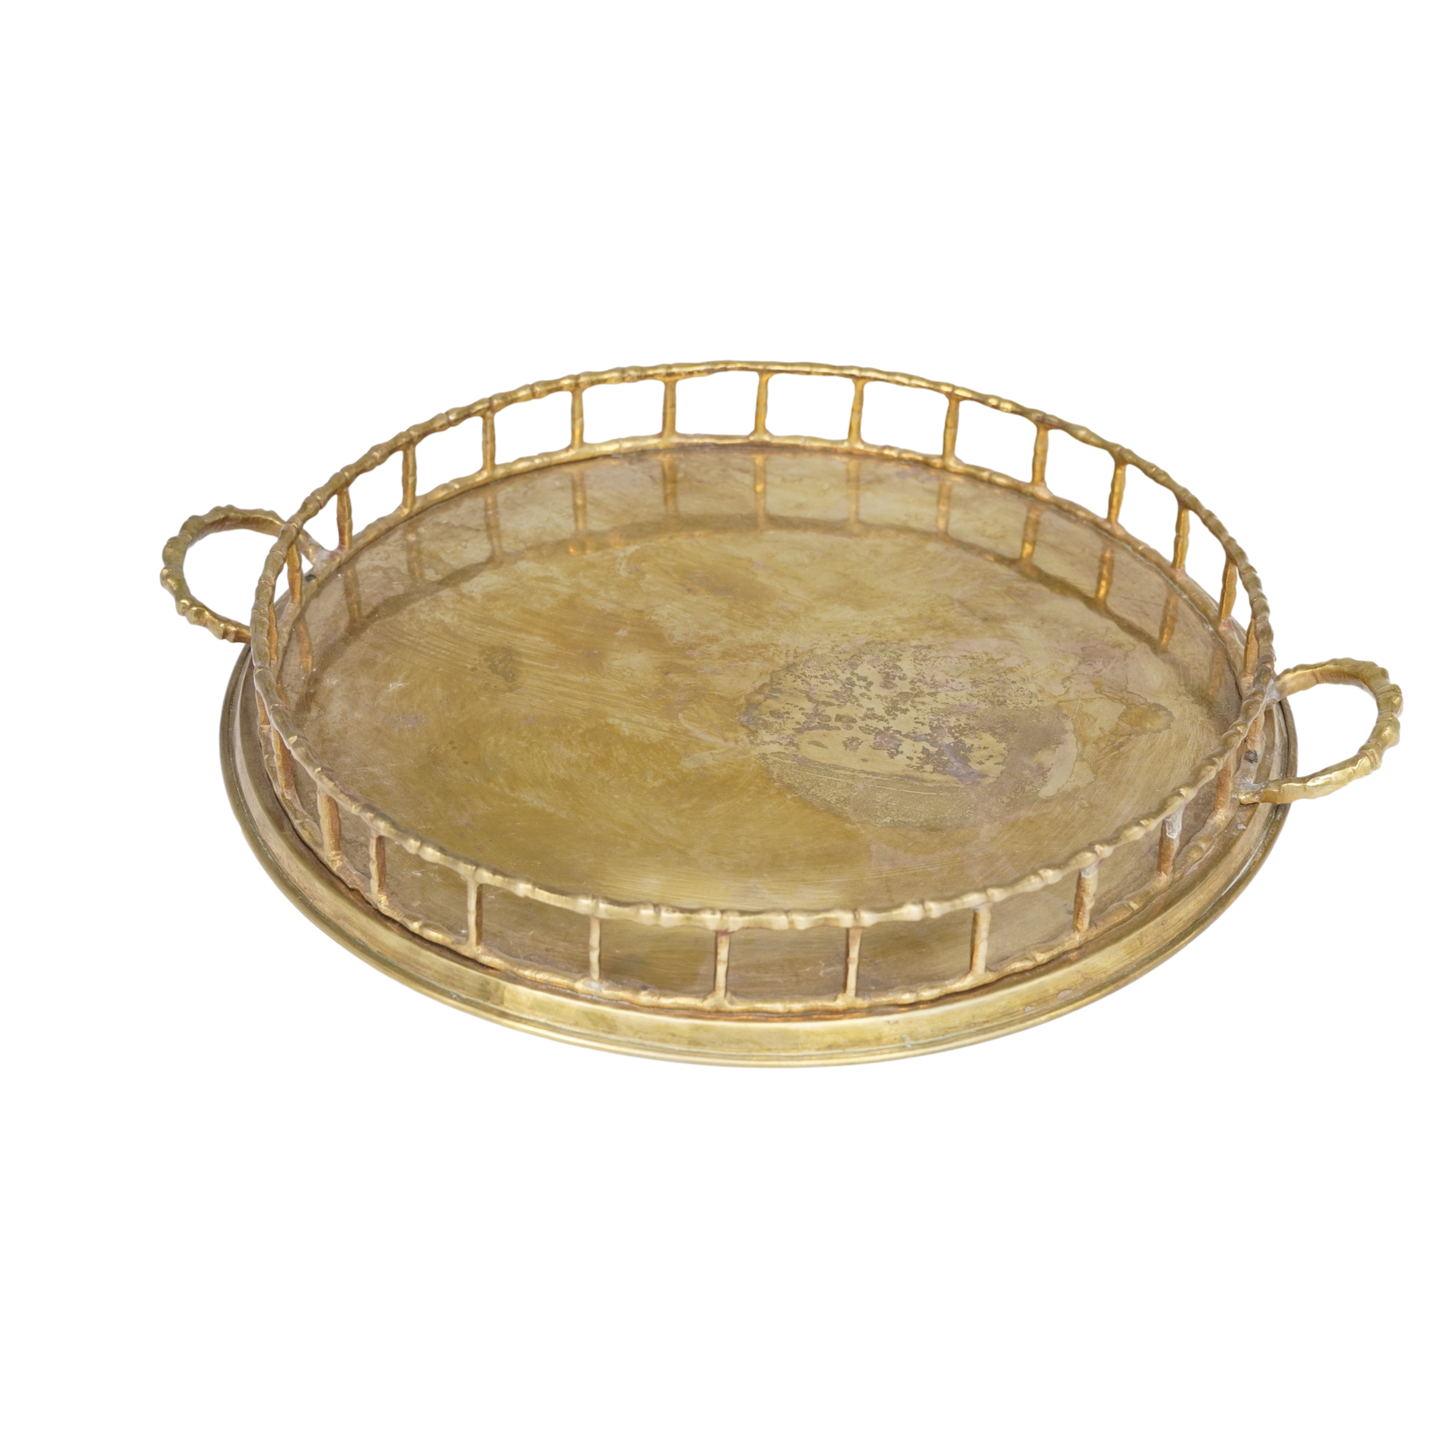 Vintage Brass Tray with Bamboo Lattice Rim Detail